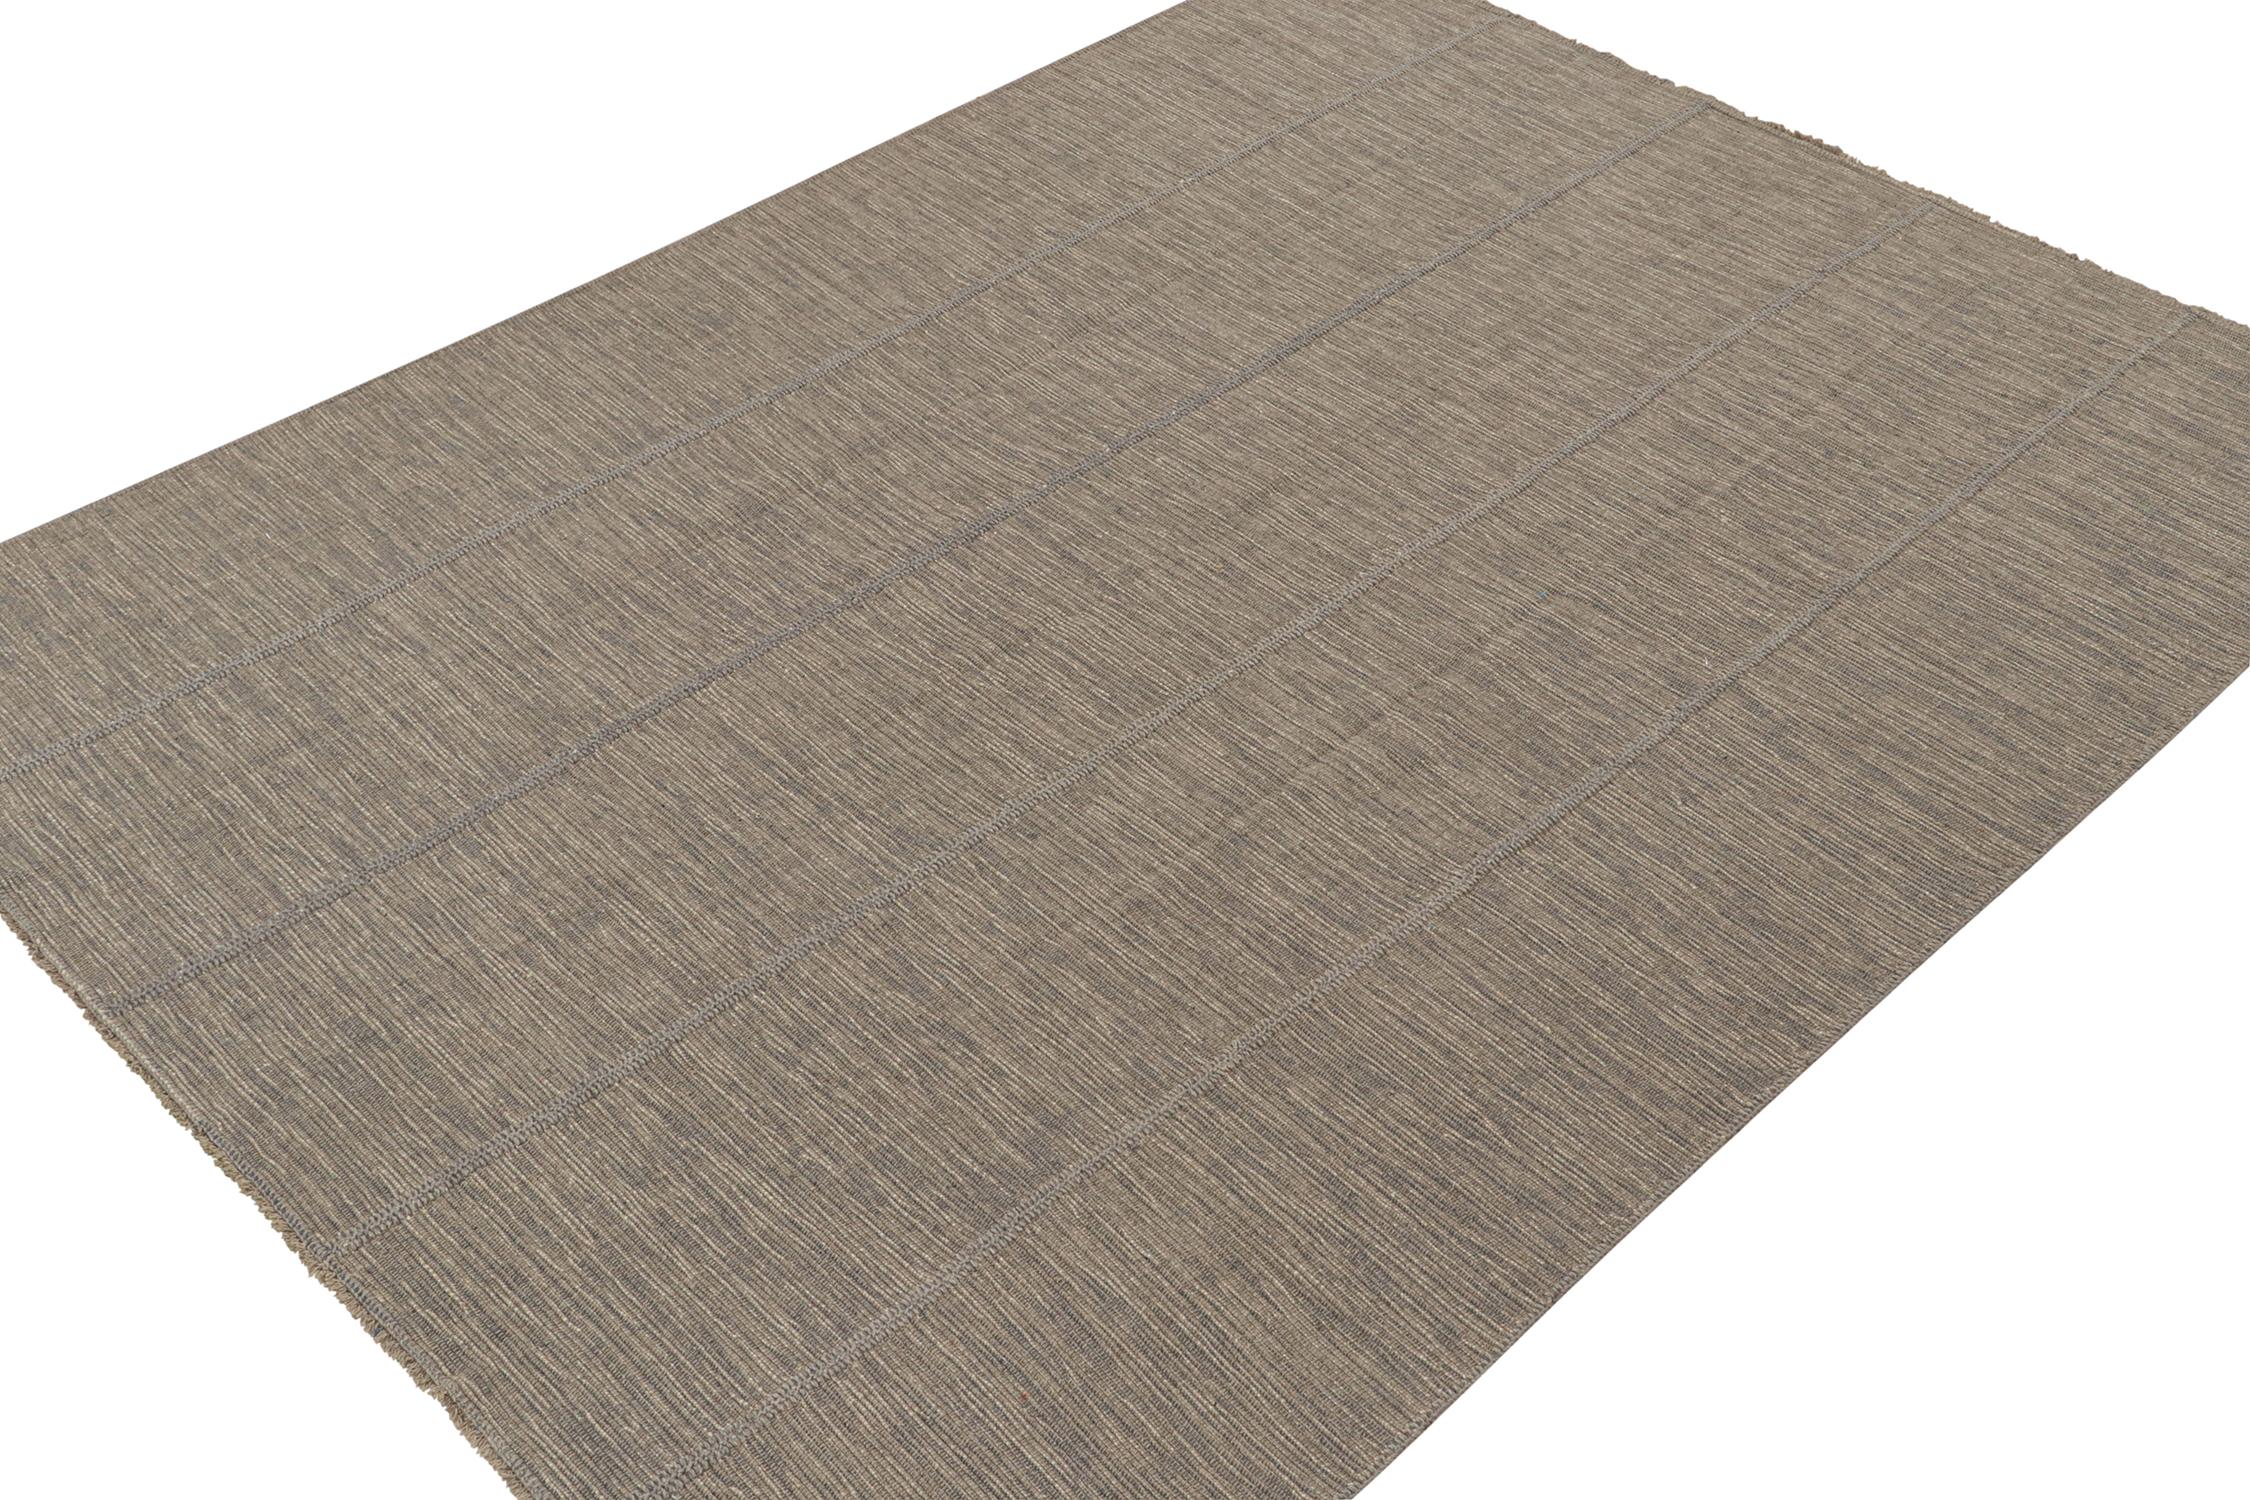 Handwoven in wool, this 9x12 Kilim is from a bold new line of contemporary flatweaves by Rug & Kilim.

Further On the Design:

The “Rez Kilim” connotes a modern take on classic panel weaving. This edition enjoys light gray with beige and blue